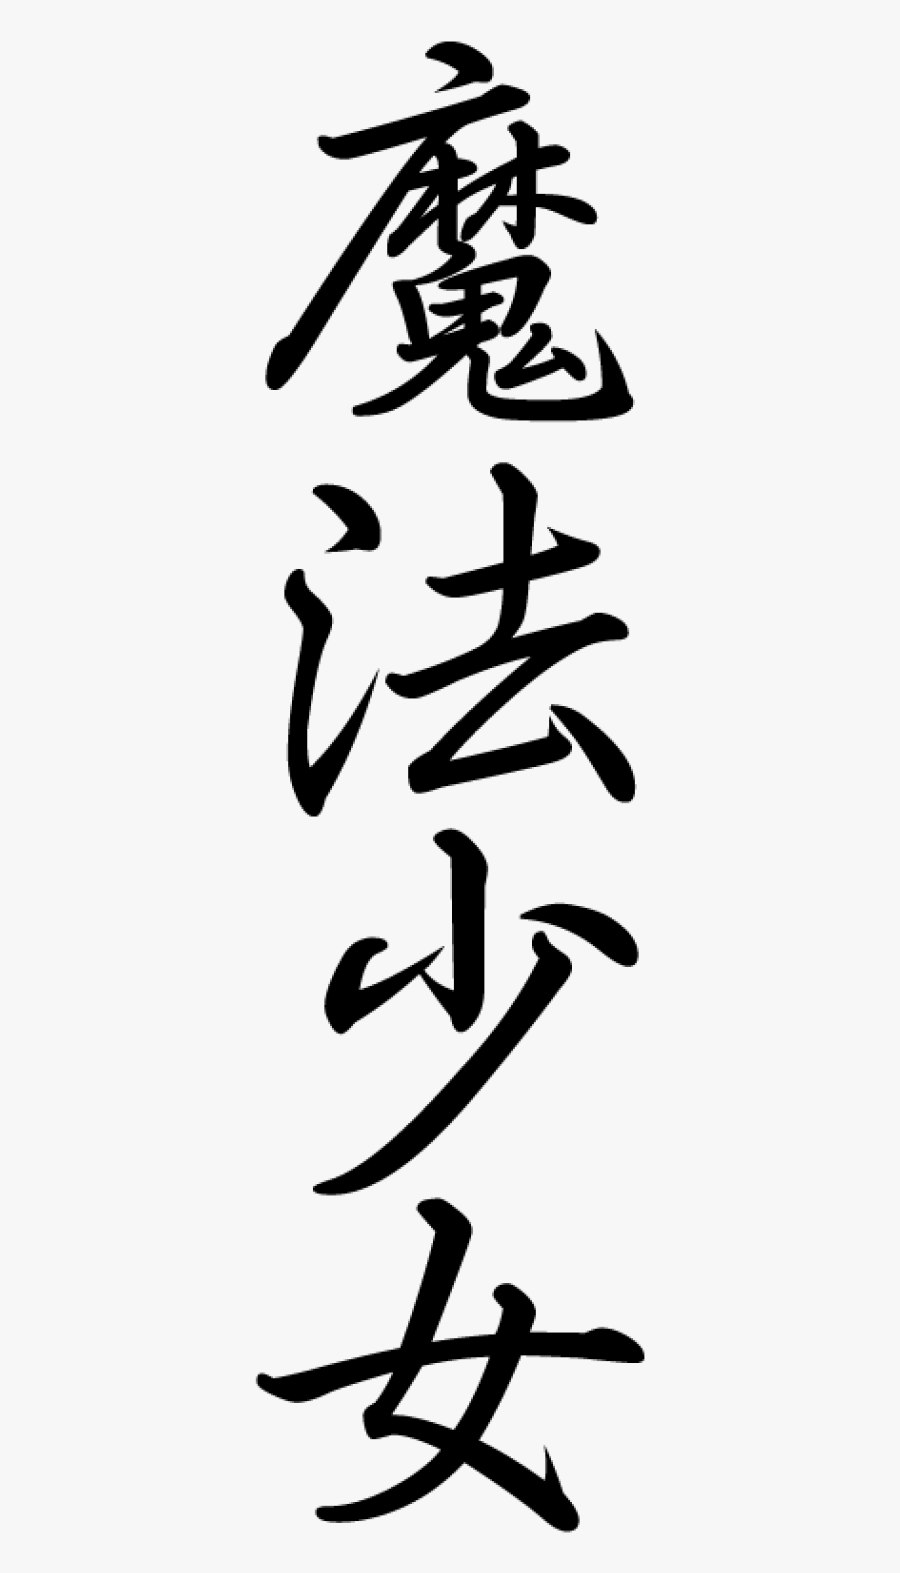 Transparent Japanese Png Text , Free Transparent Clipart - ClipartKey